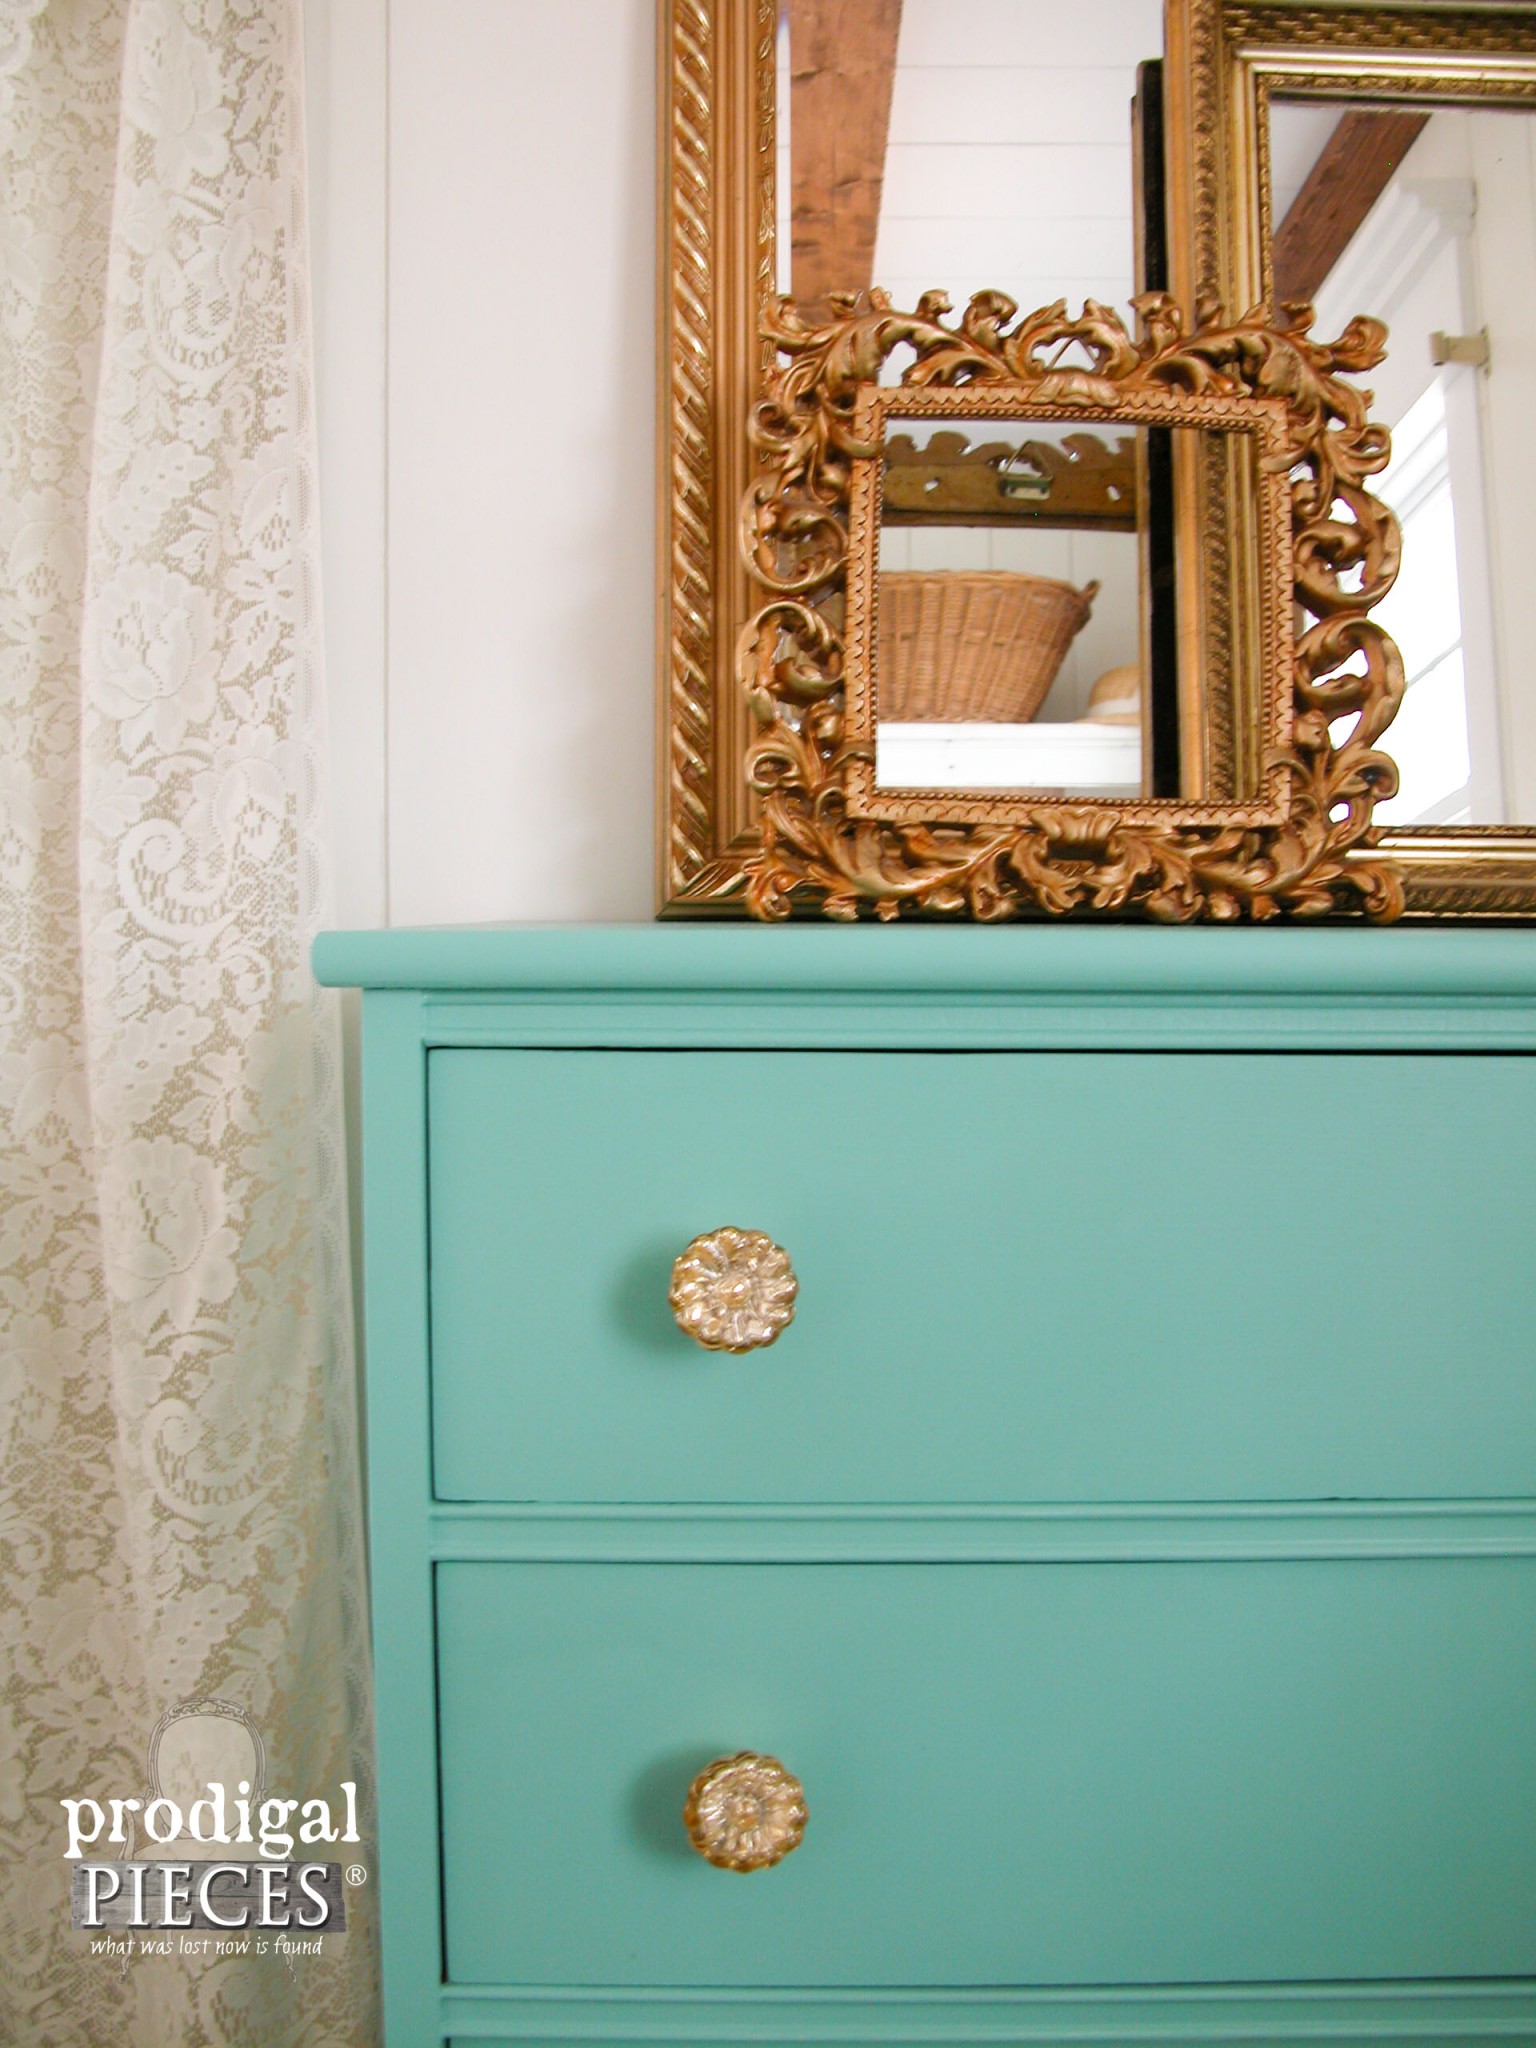 Corner View of Teal Vintage Chest by Prodigal Pieces | www.prodigalpieces.com